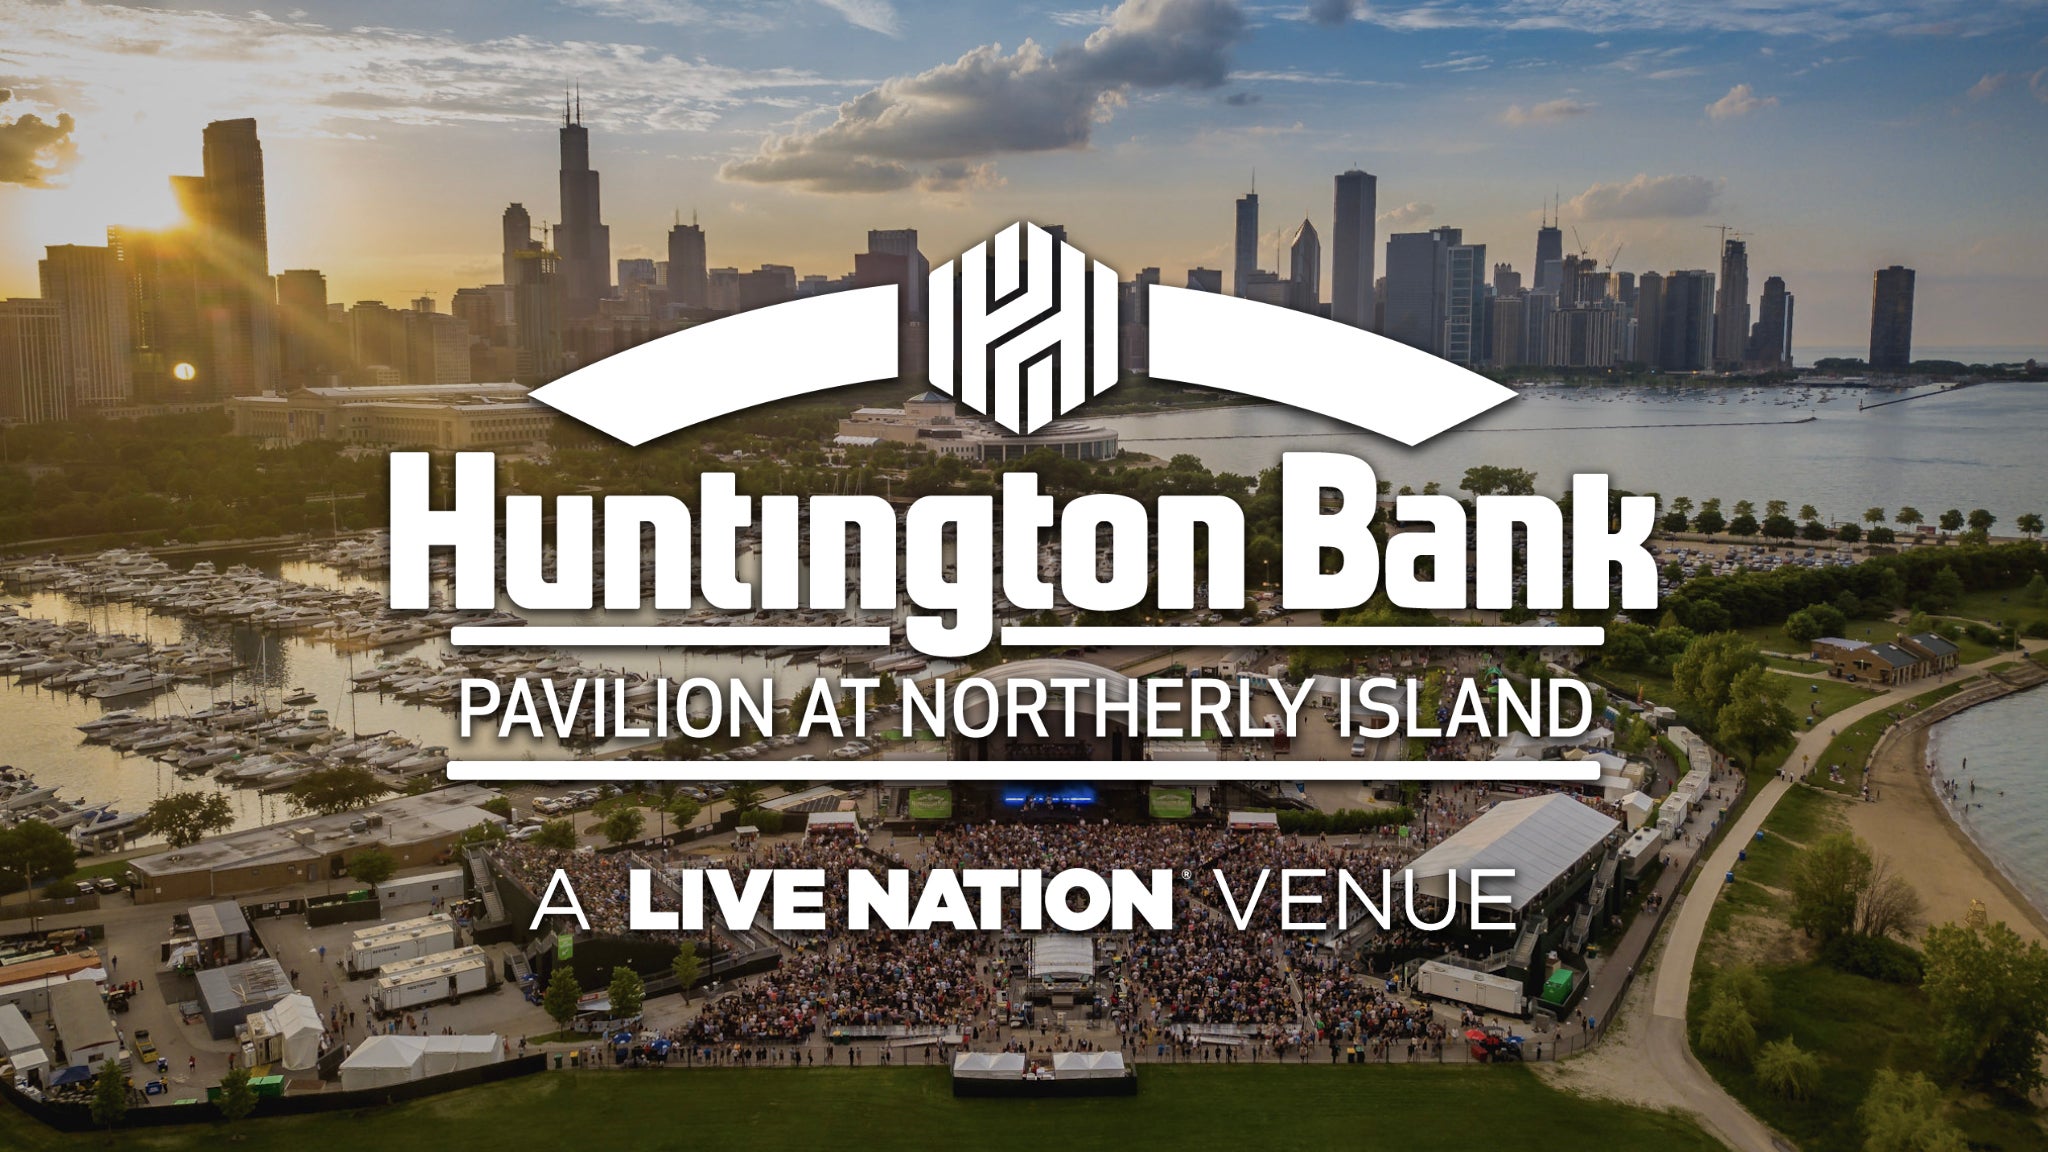 Huntington Bank Pavilion at Northerly Island - 2021 show schedule & venue information - Live Nation